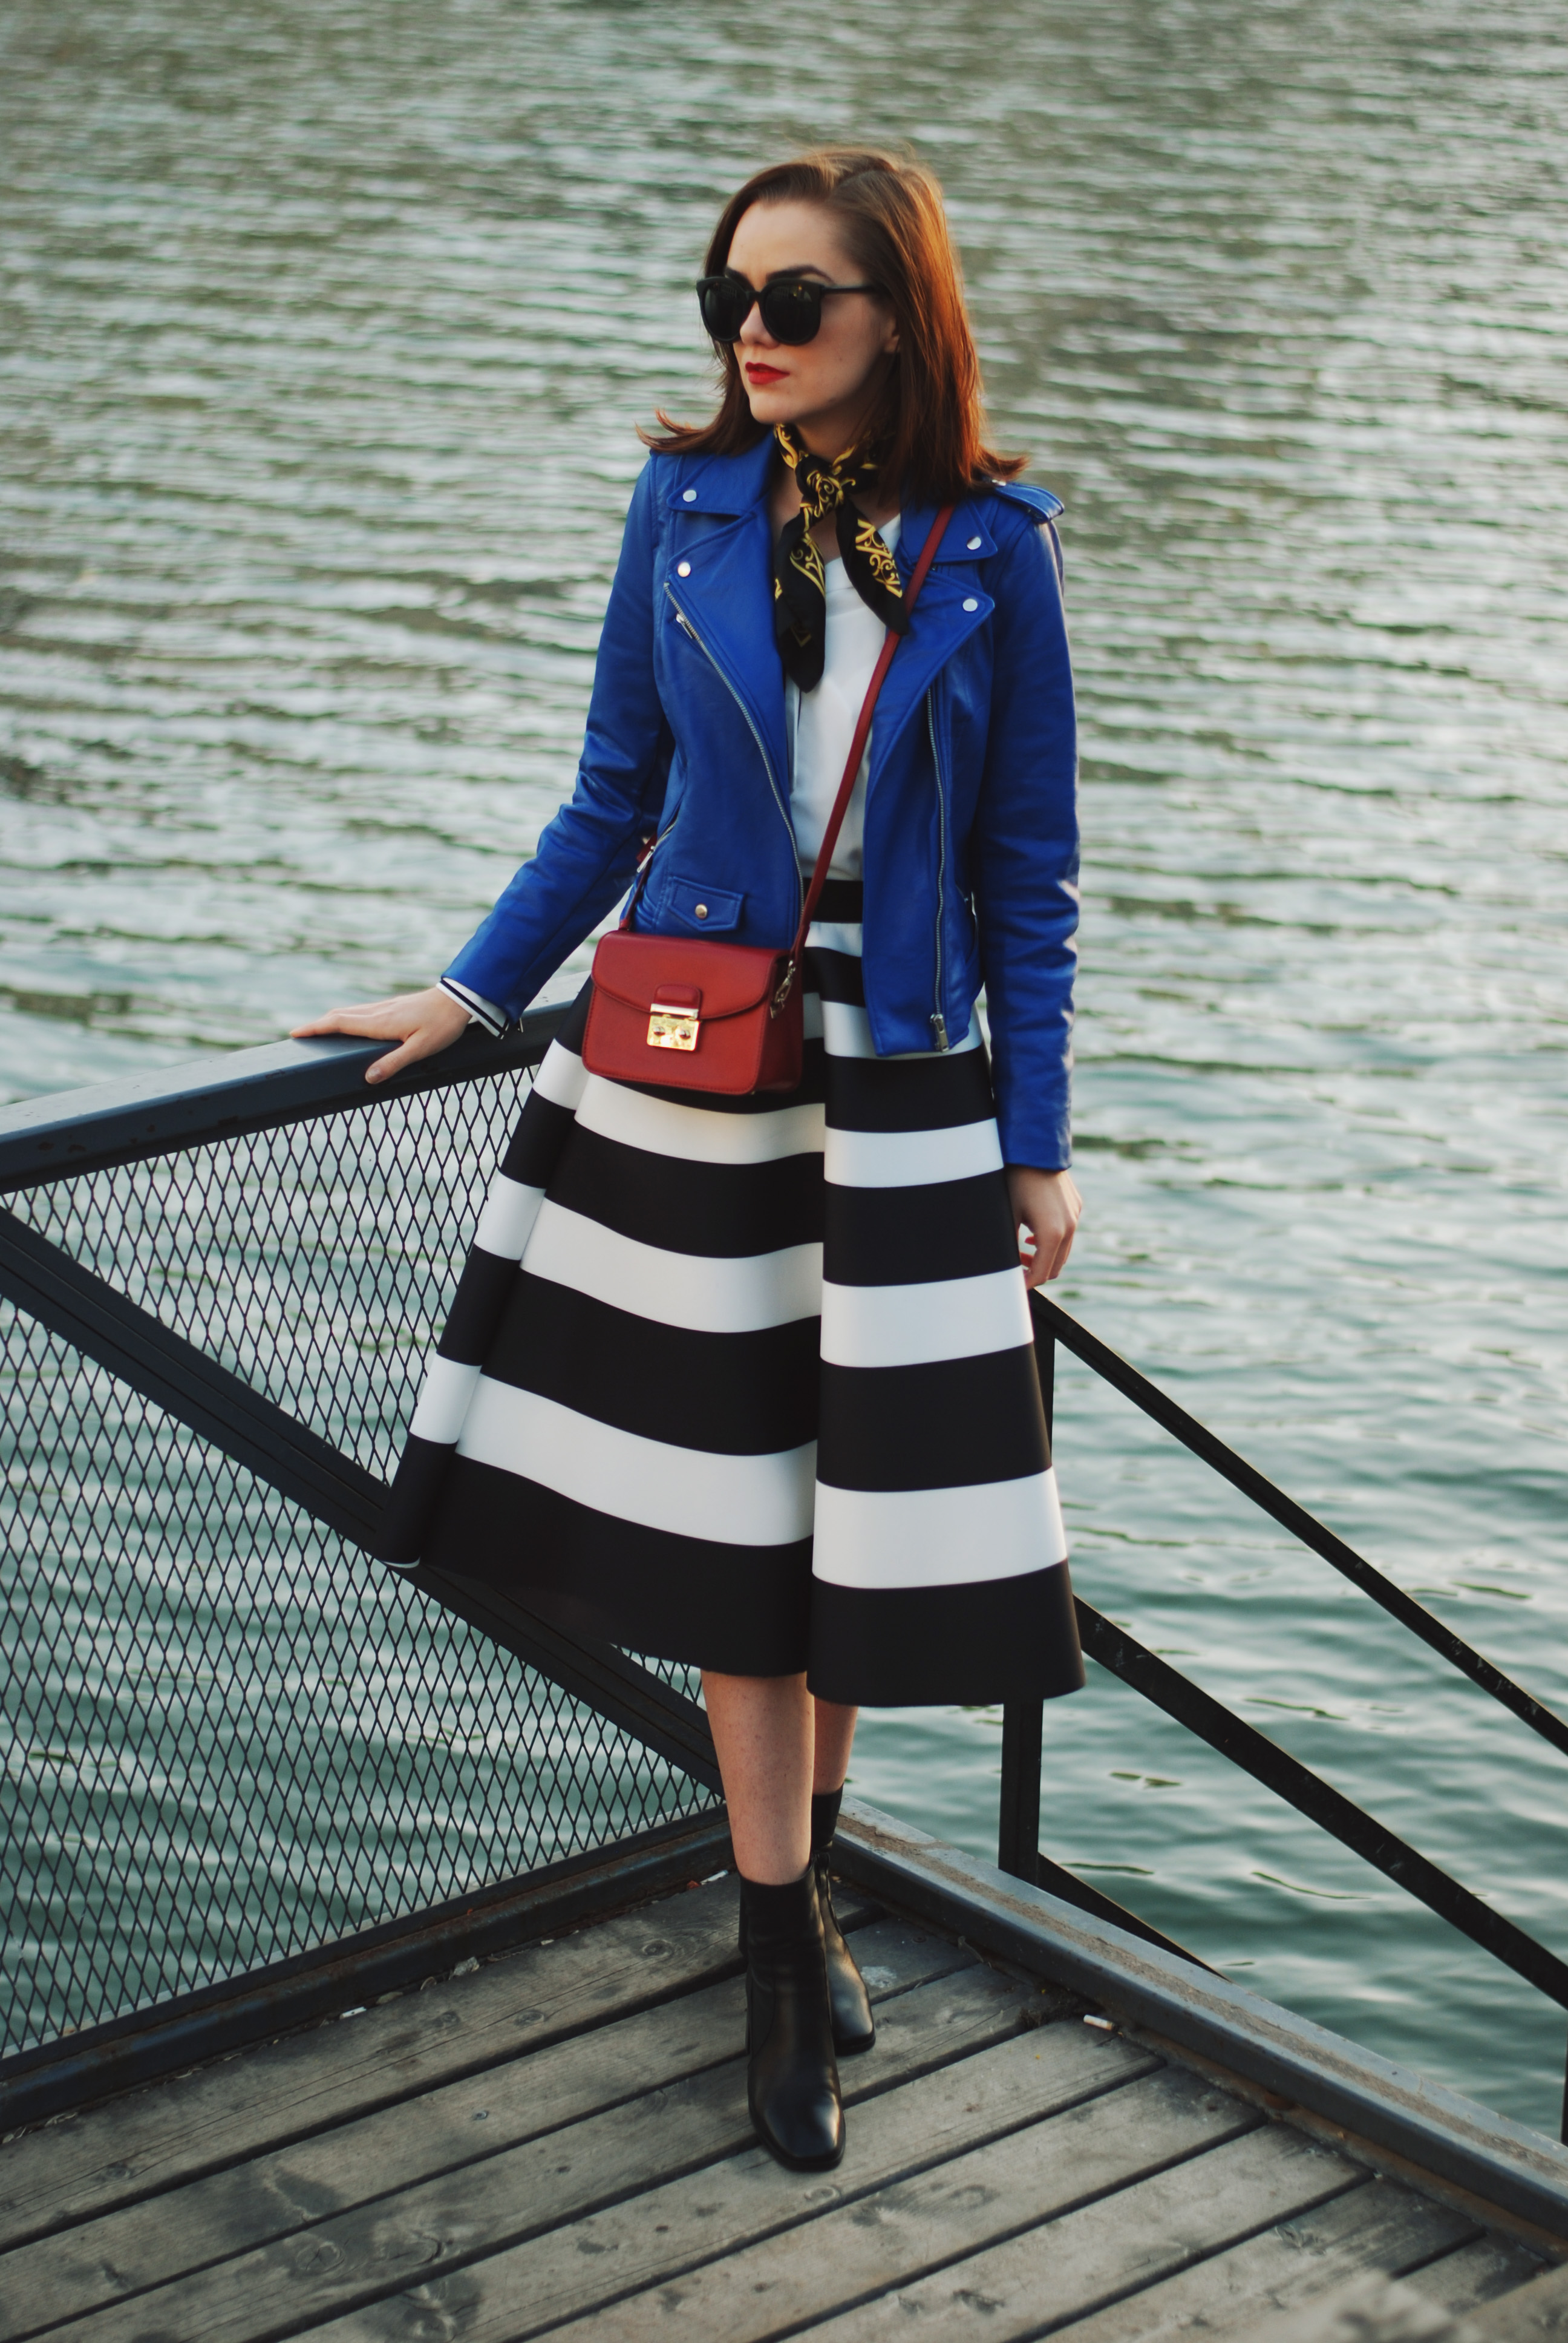 Blue leather jacket, white contrast top, cat eye sunglasses, striped midi skirt, zara leather ankle boots, red crossbody bag, scarf, cute best fall outfit idea, Andreea Birsan